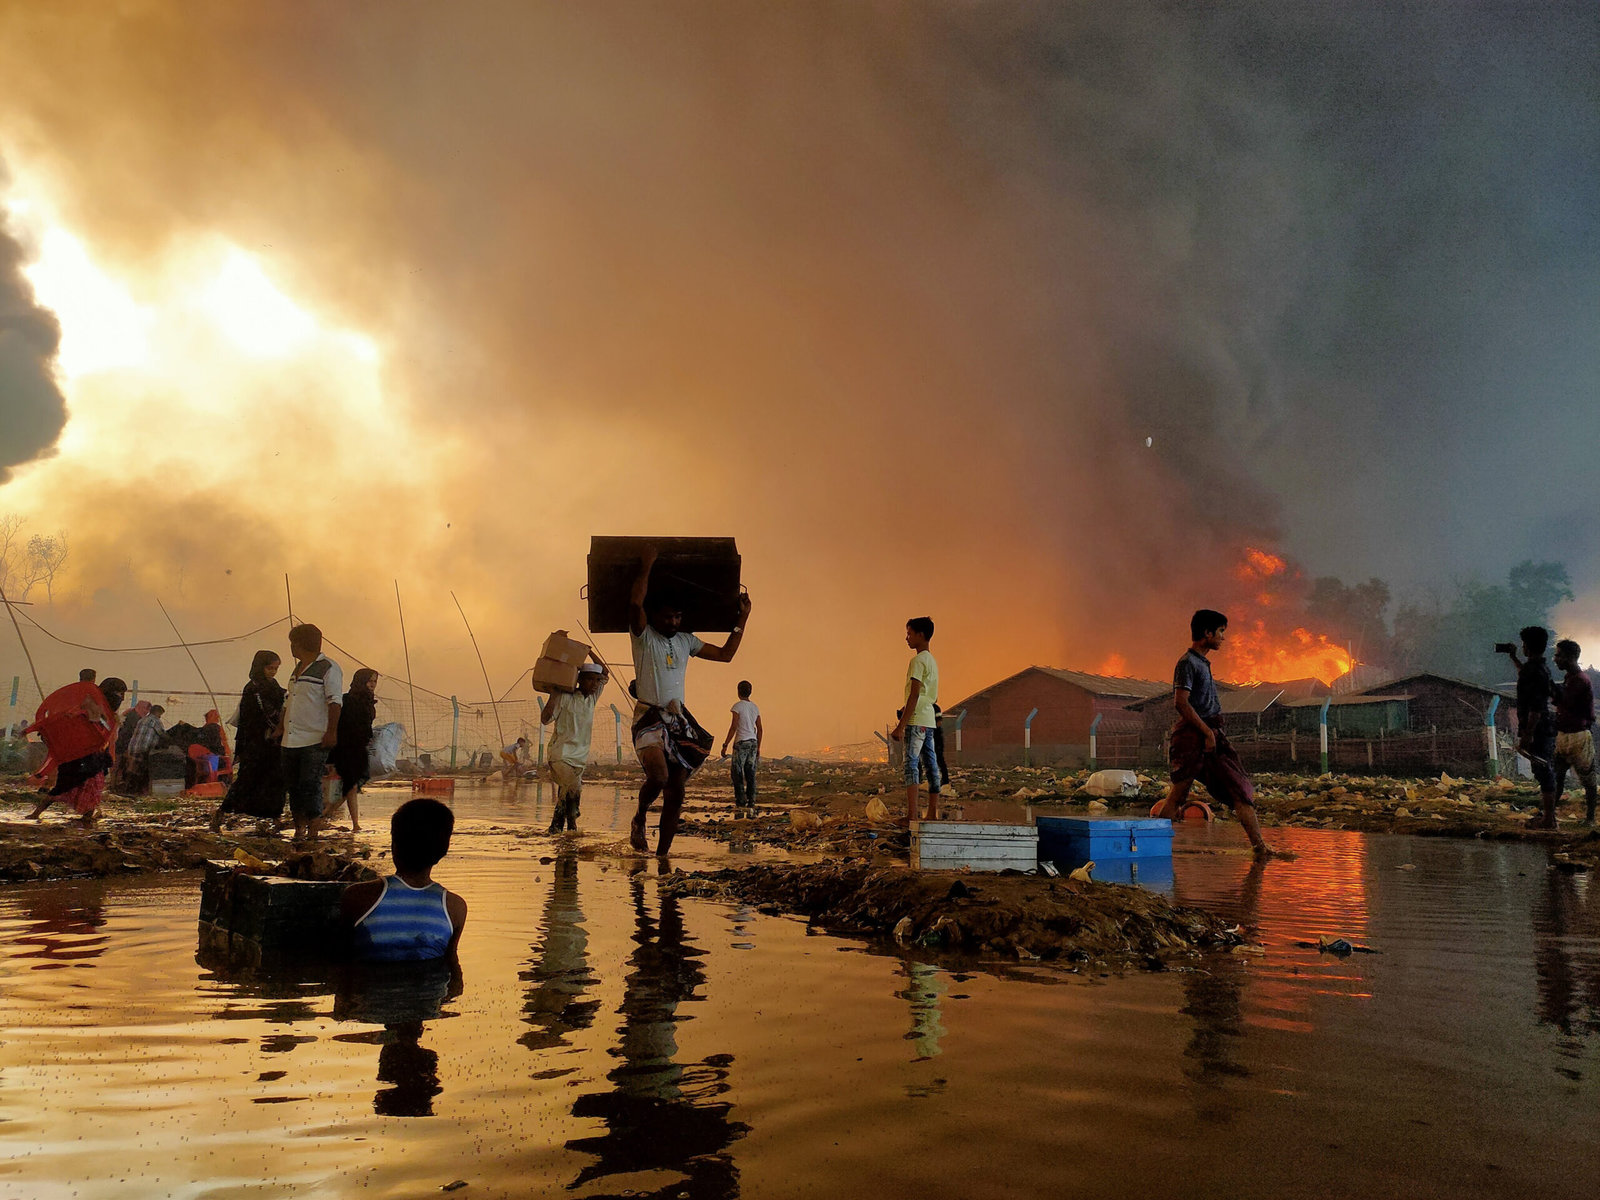 People rush to save their lives and property from a big fire in Balukhali camp. The fire is visible in the background.